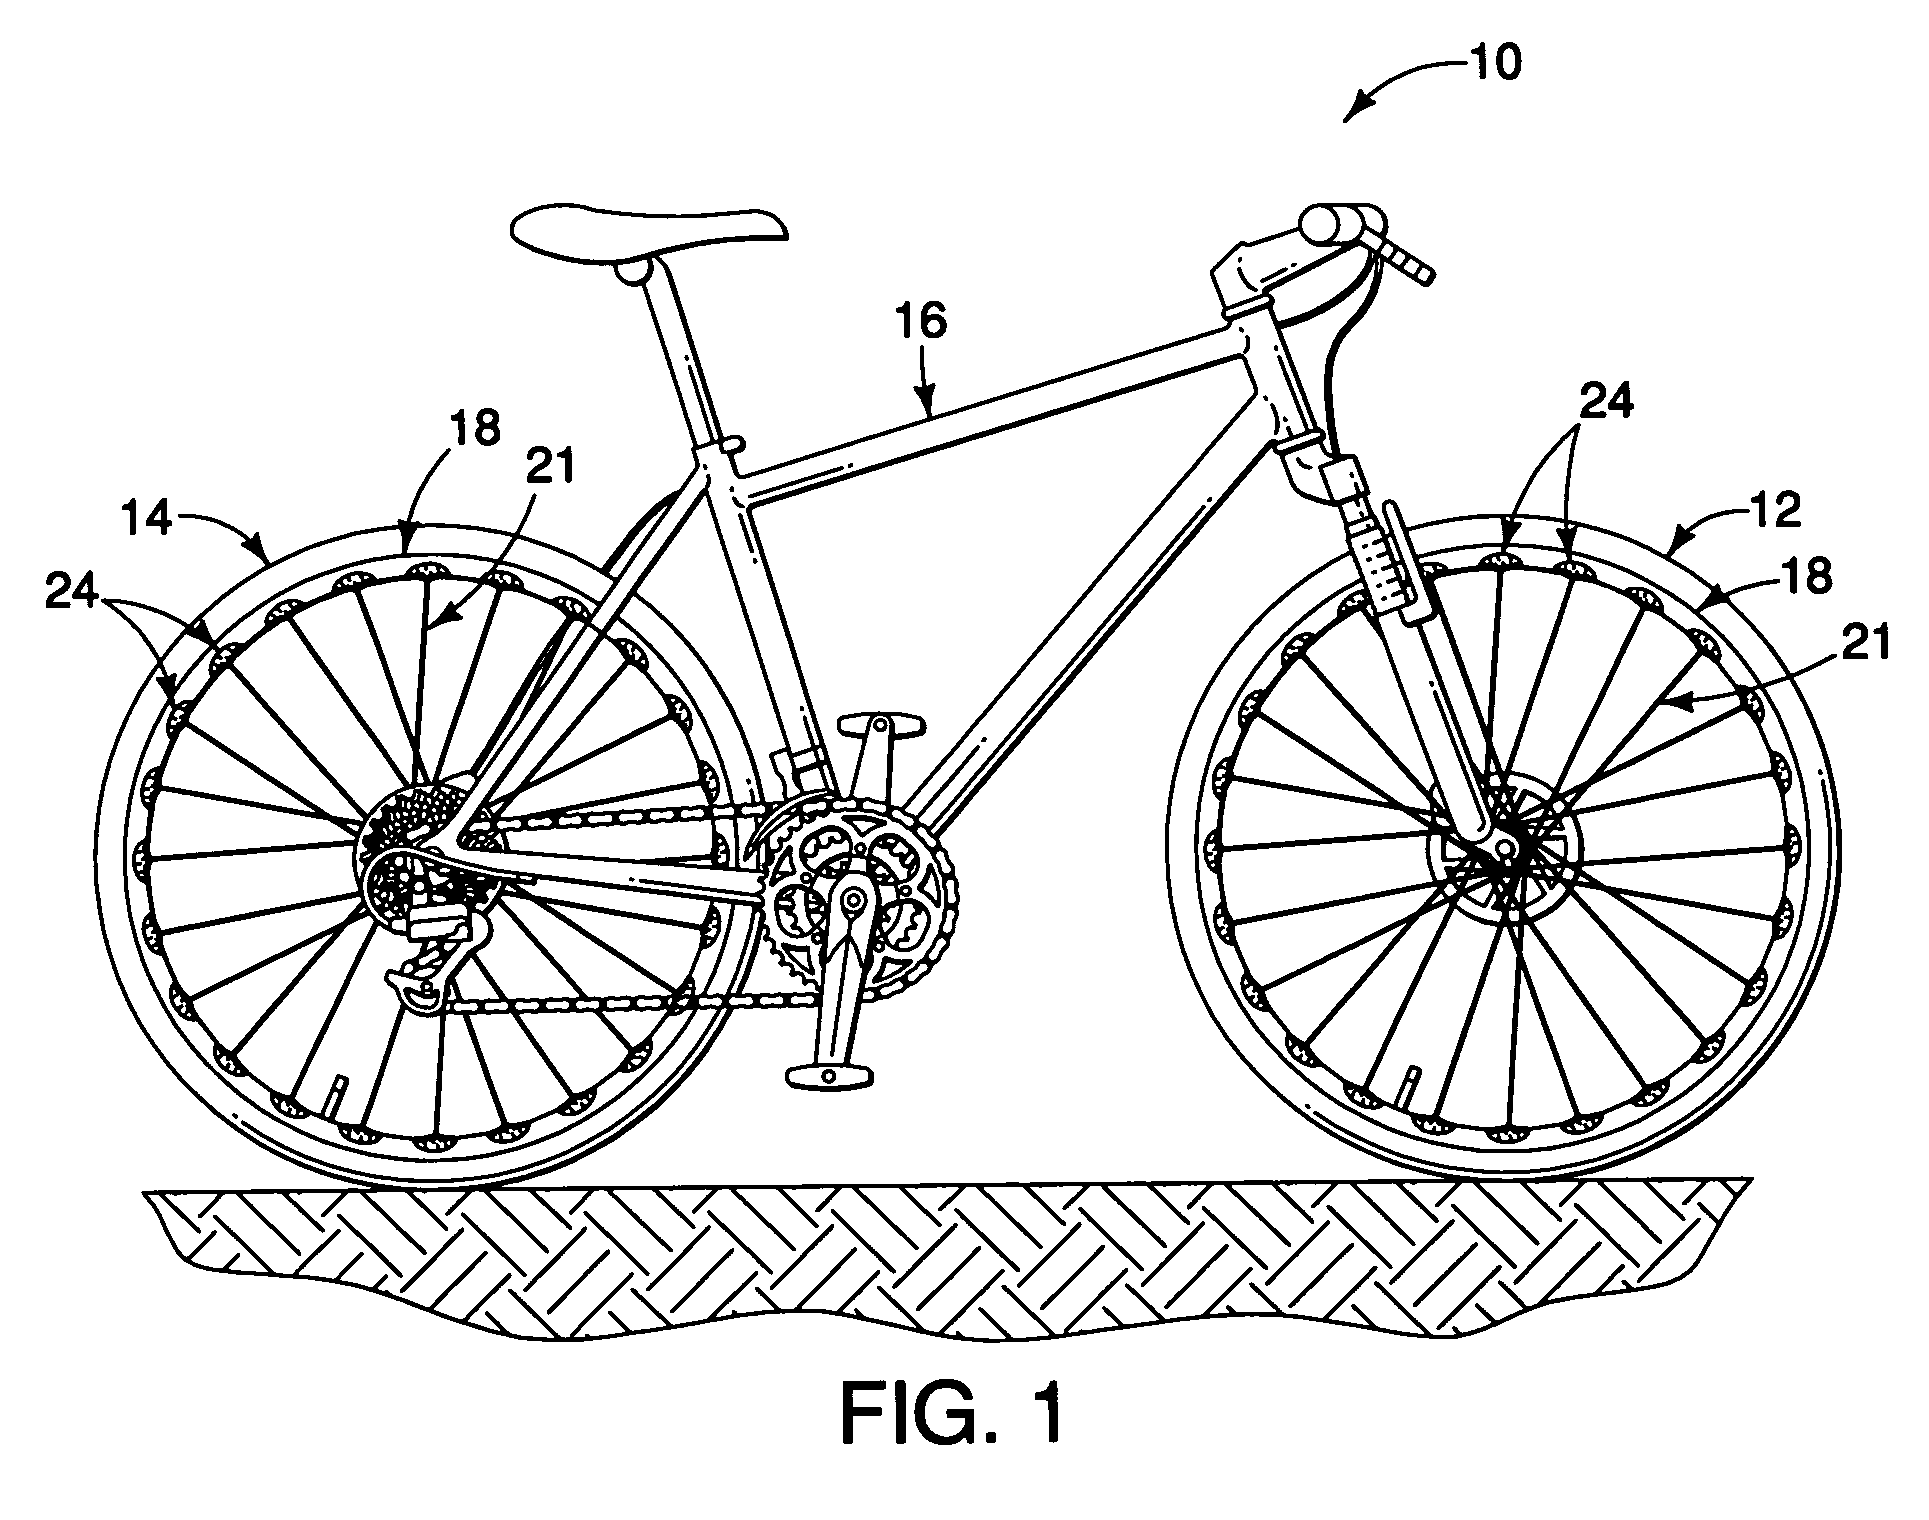 Bicycle rim reinforced with a continuously extending resin material